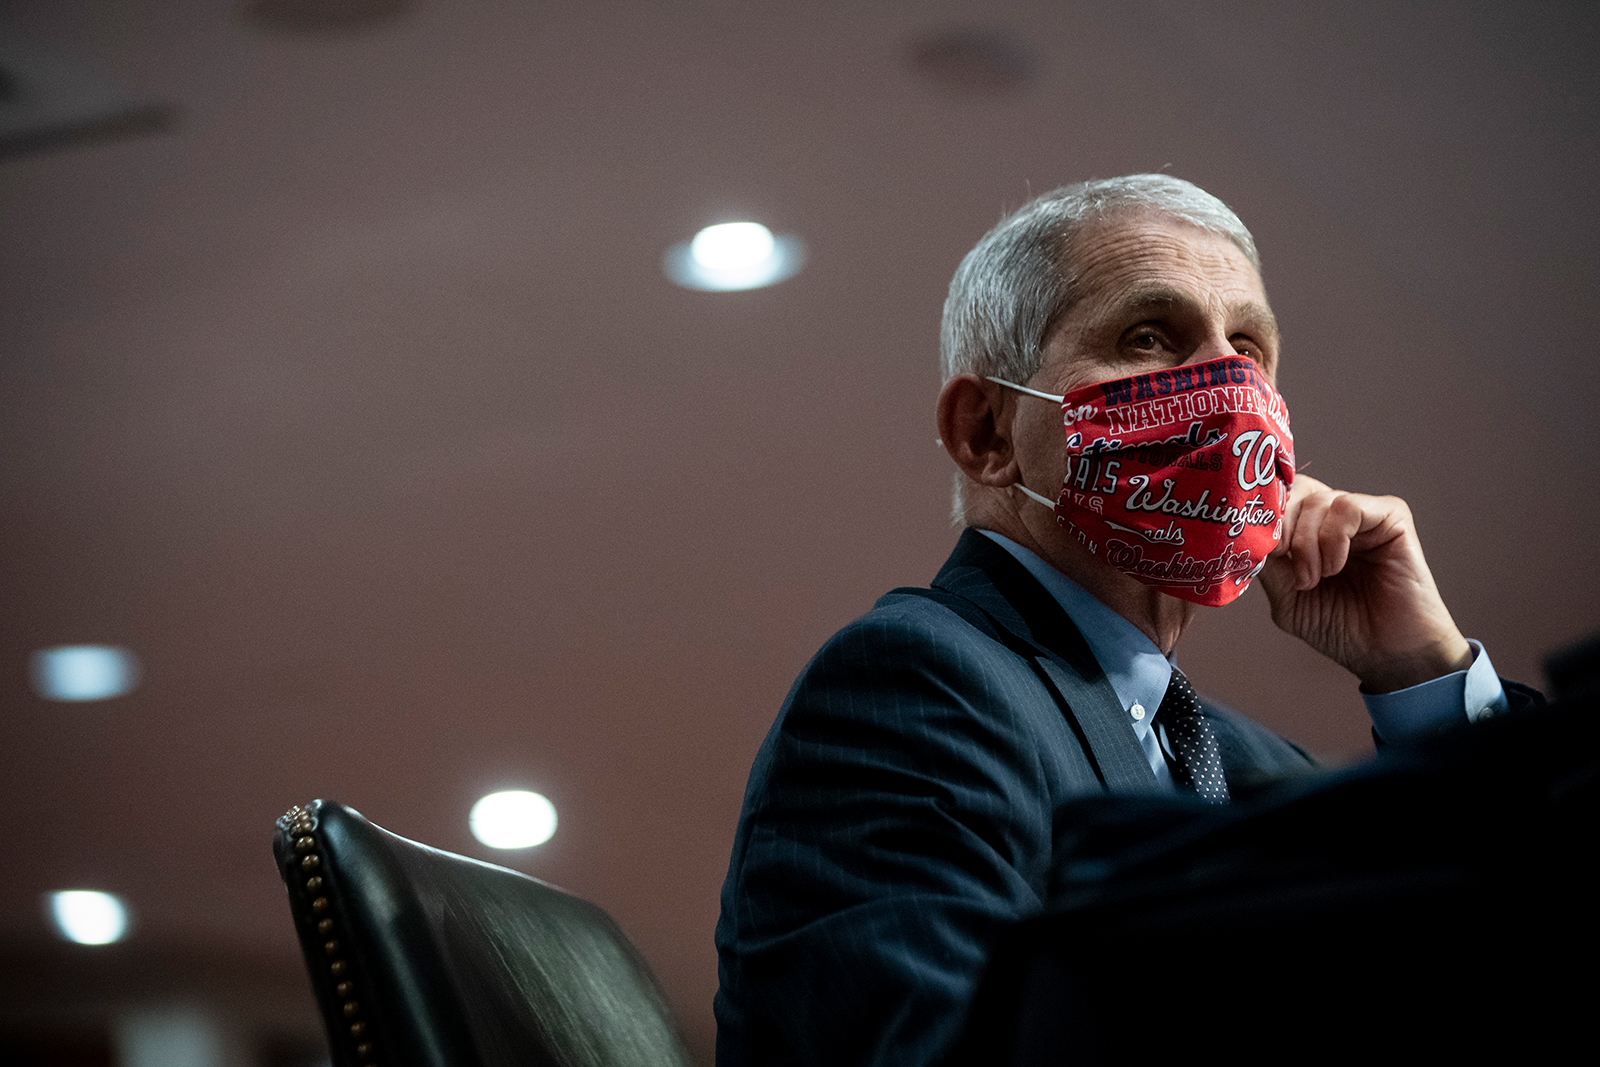 Dr. Anthony Fauci, director of the National Institute of Allergy and Infectious Diseases, wears a face covering as he listens during a Senate Health, Education, Labor and Pensions Committee hearing on June 30, in Washington.